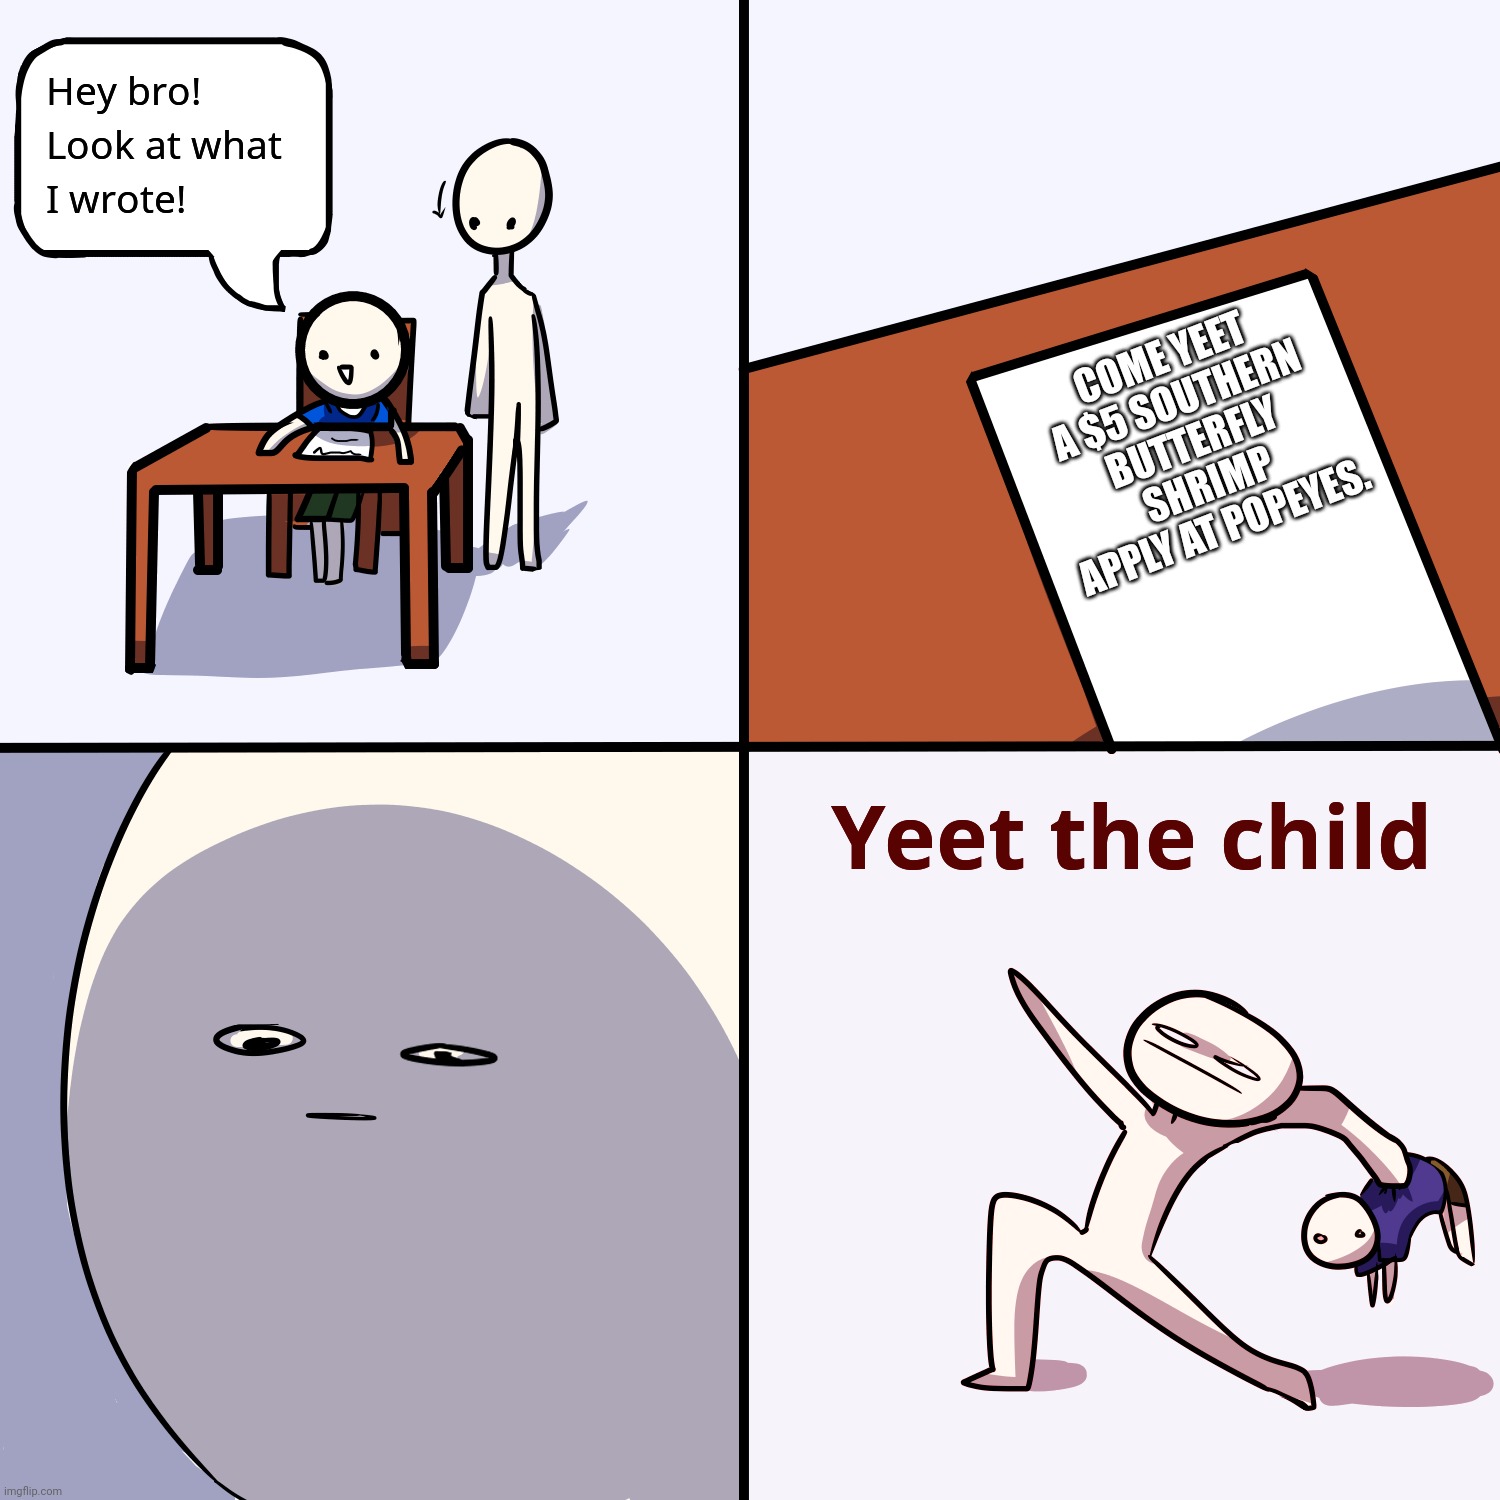 Yeet the child | COME YEET A $5 SOUTHERN BUTTERFLY SHRIMP APPLY AT POPEYES. | image tagged in yeet the child | made w/ Imgflip meme maker